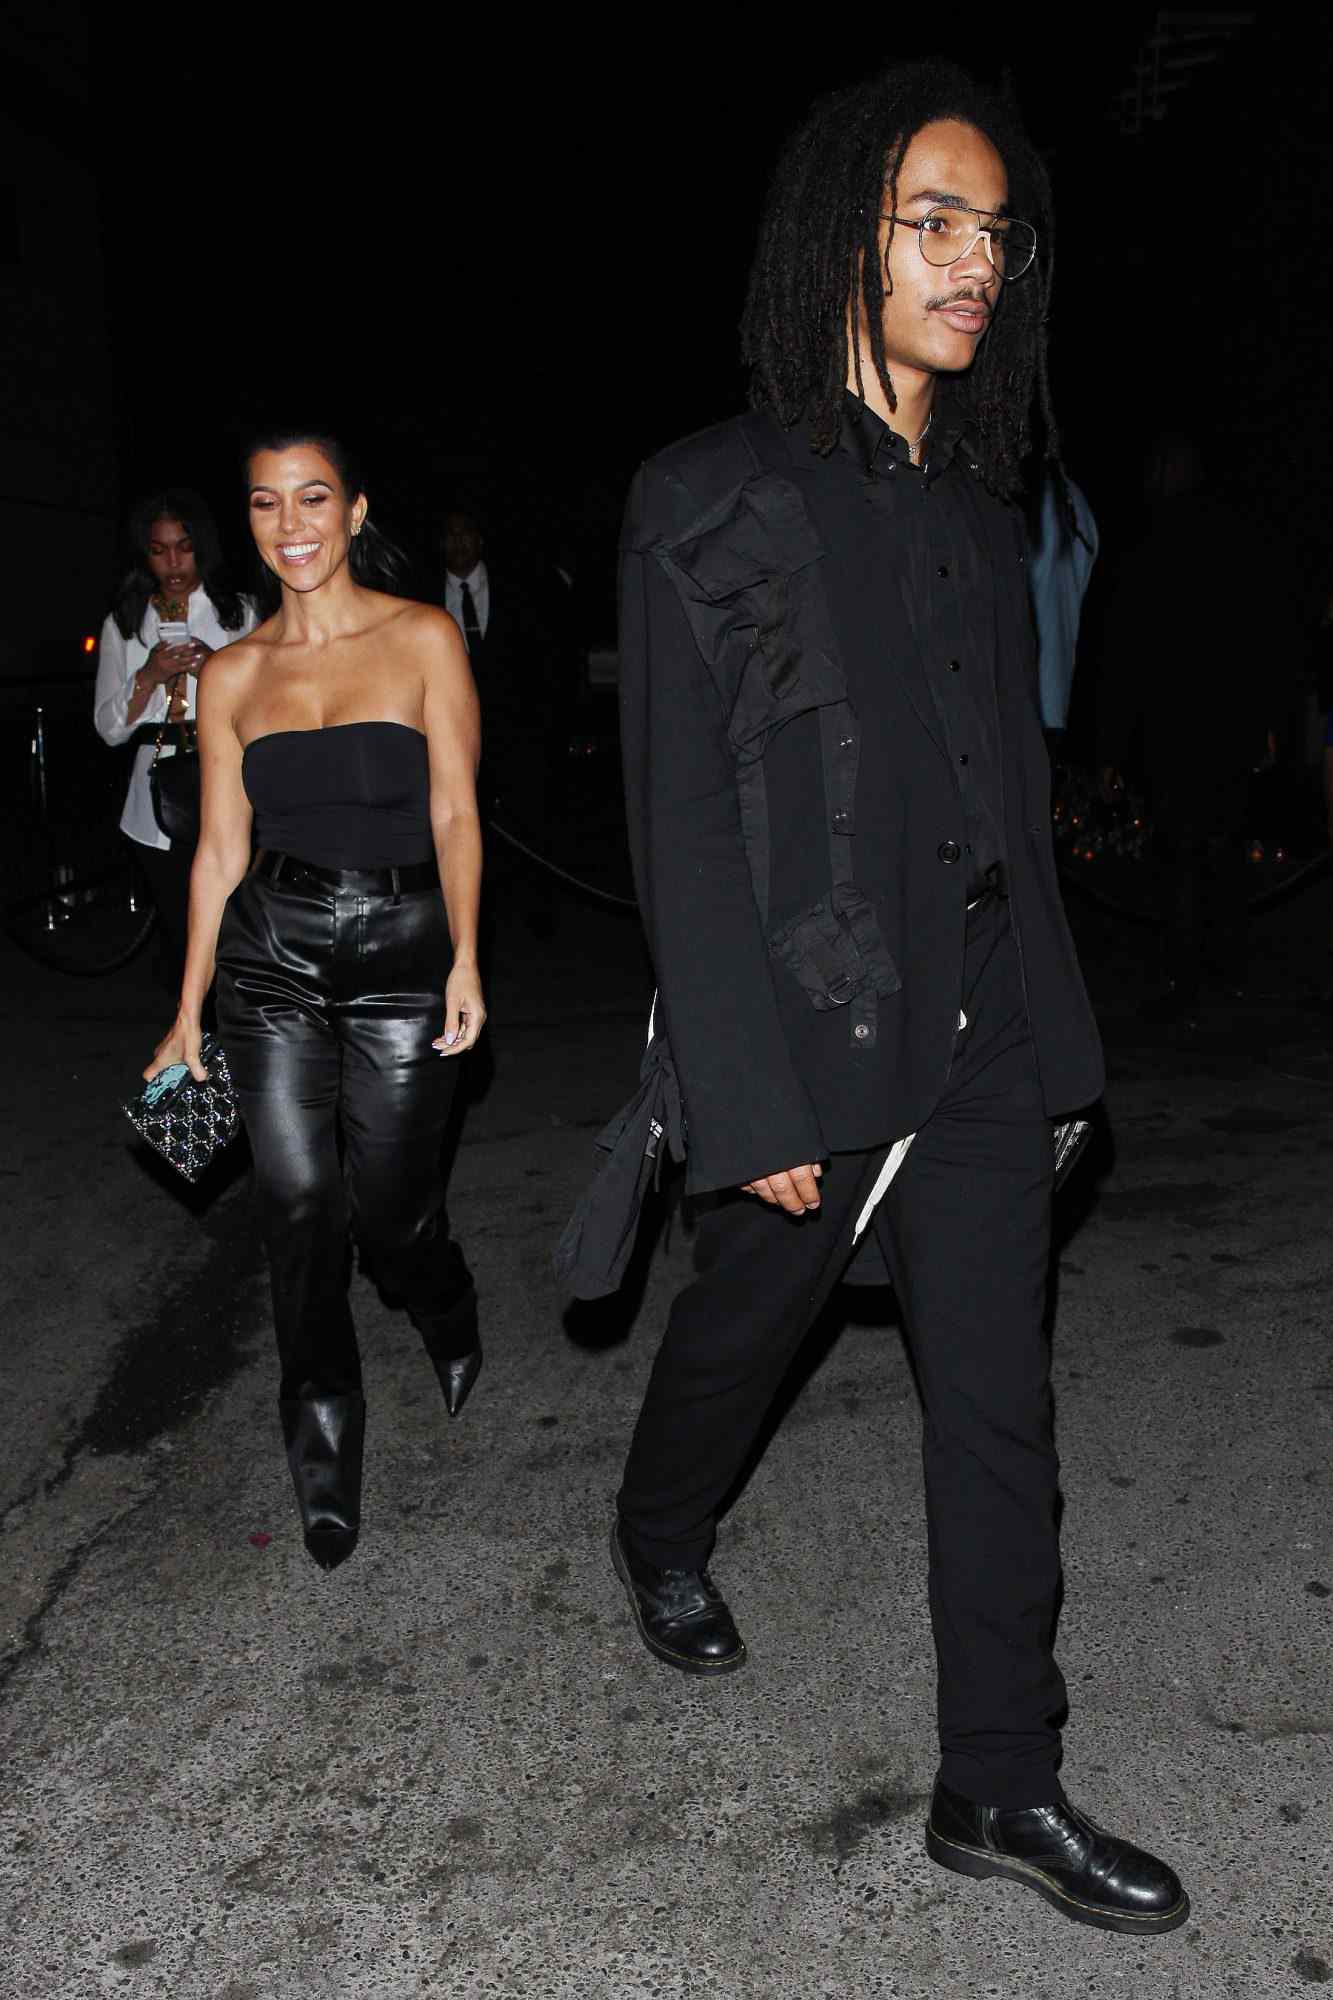 Kourtney Kardashian and Luka Sabbat are seen leaving Ysabel restaurant after attending P Diddy's 49th birthday party